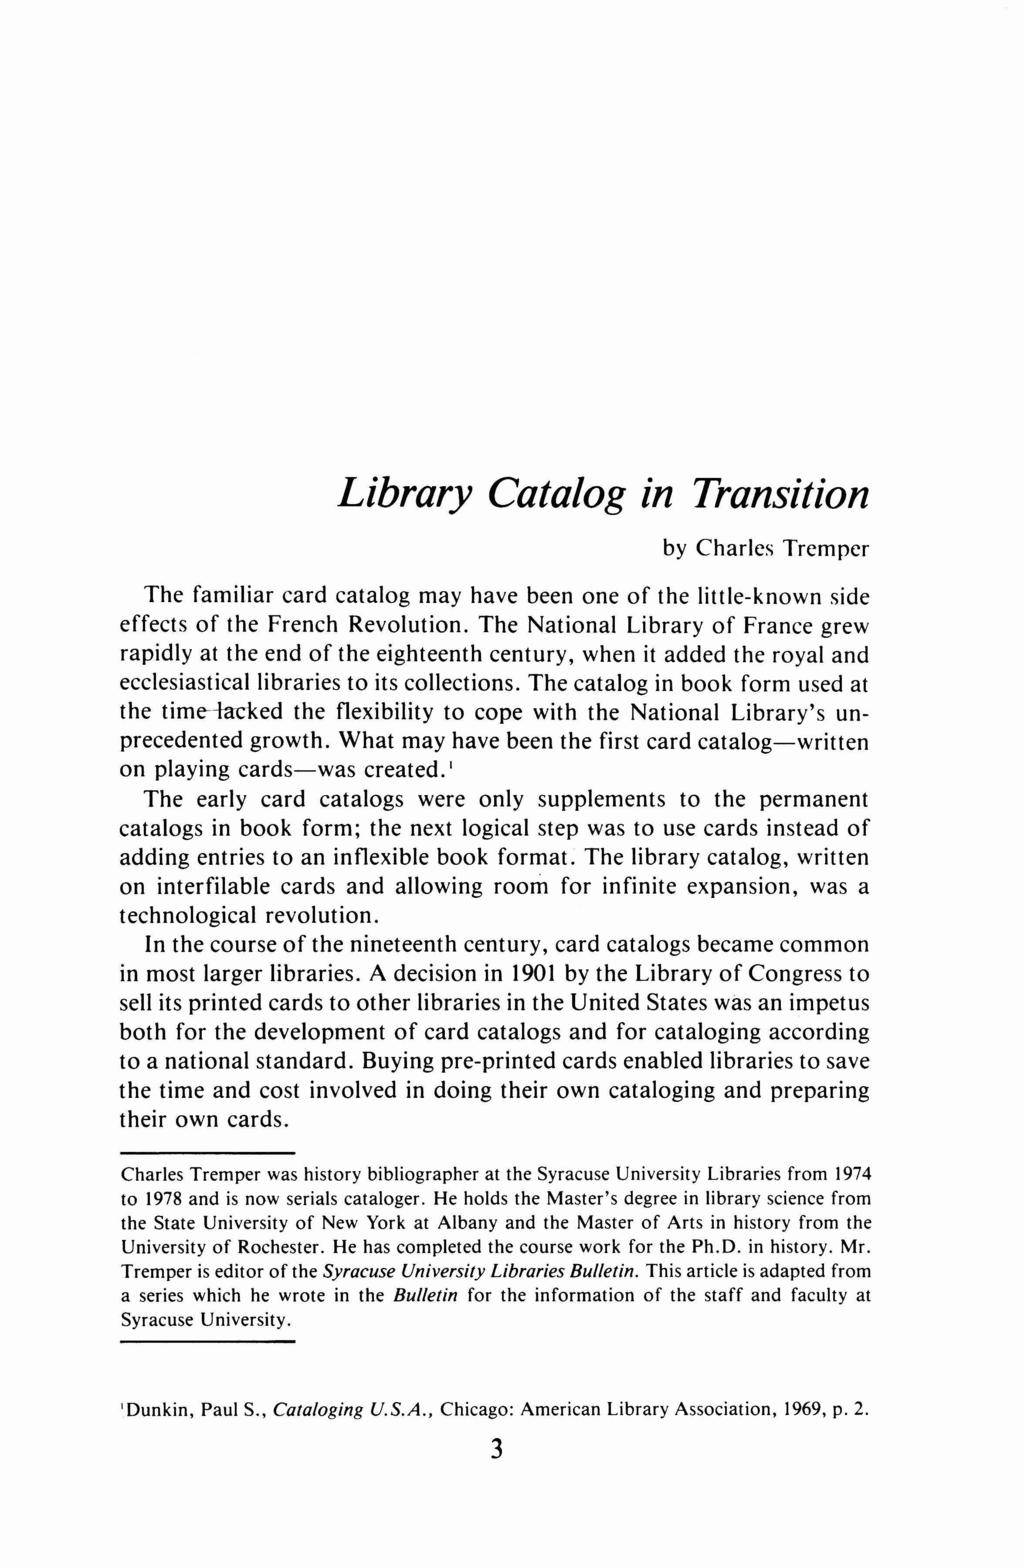 Library Catalog in Transition by Charles Tremper The familiar card catalog may have been one of the little-known side effects of the French Revolution.